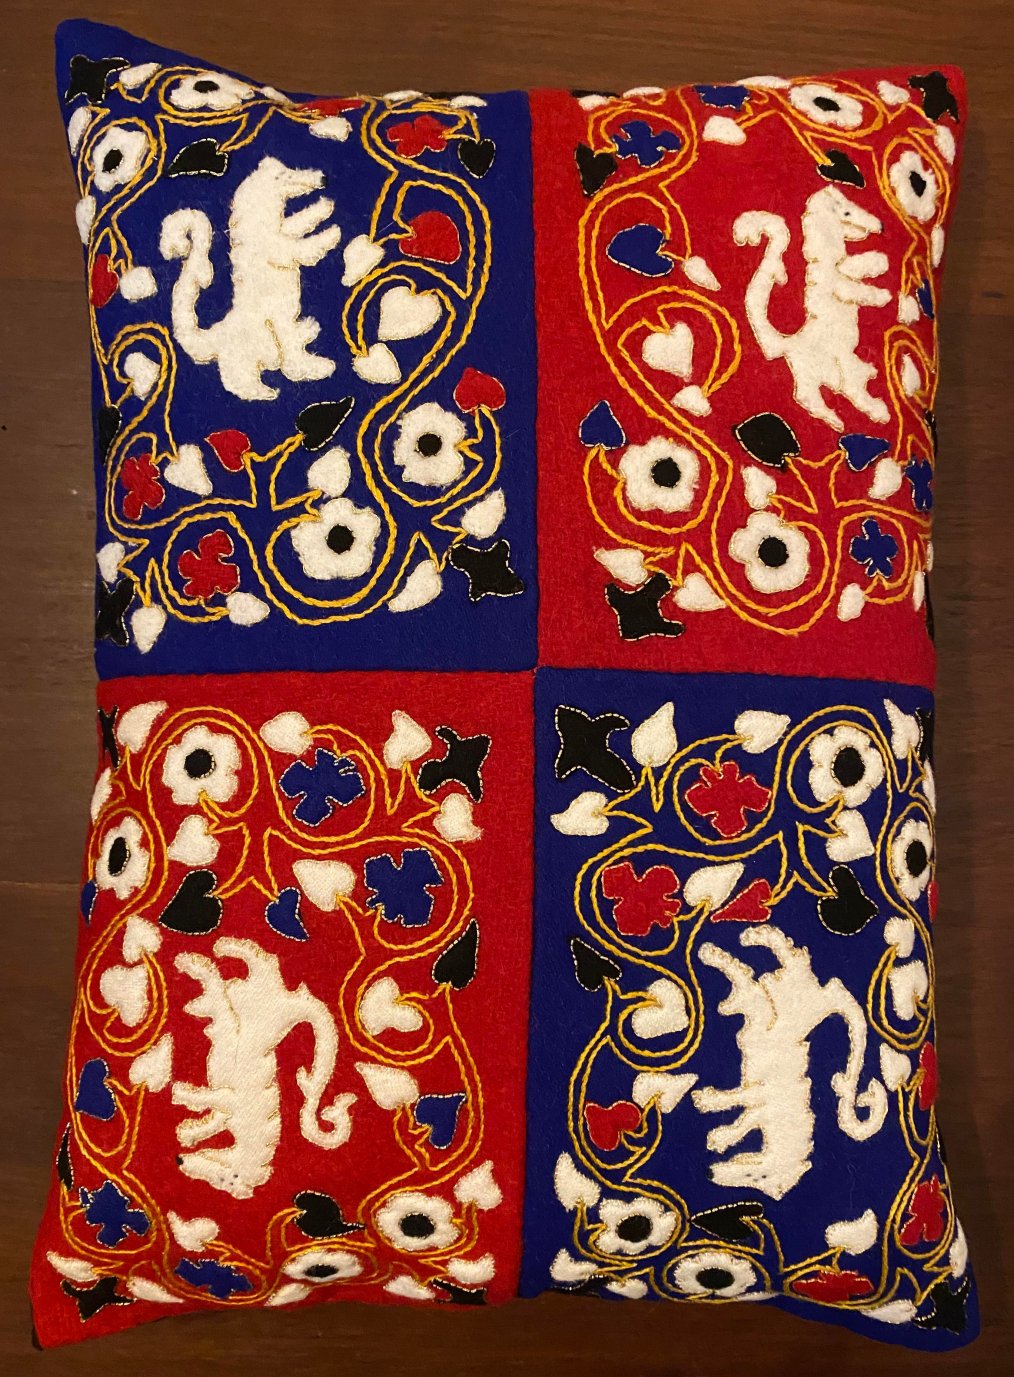 15th century embroidered cushion with animals